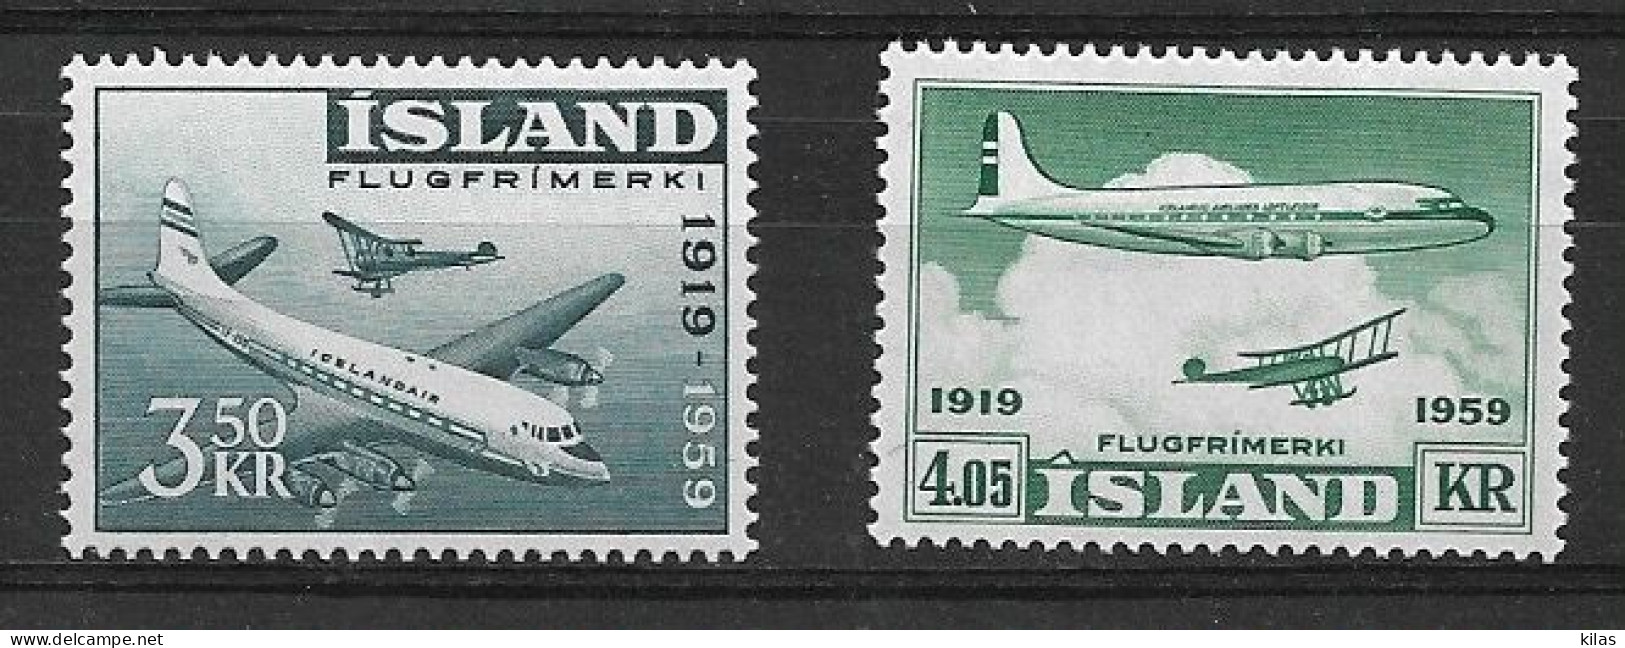 ICELAND 1959 Airmal 40TH ANNIVERSARY OF ICELANDIAN AVIATION  MNH - Luchtpost